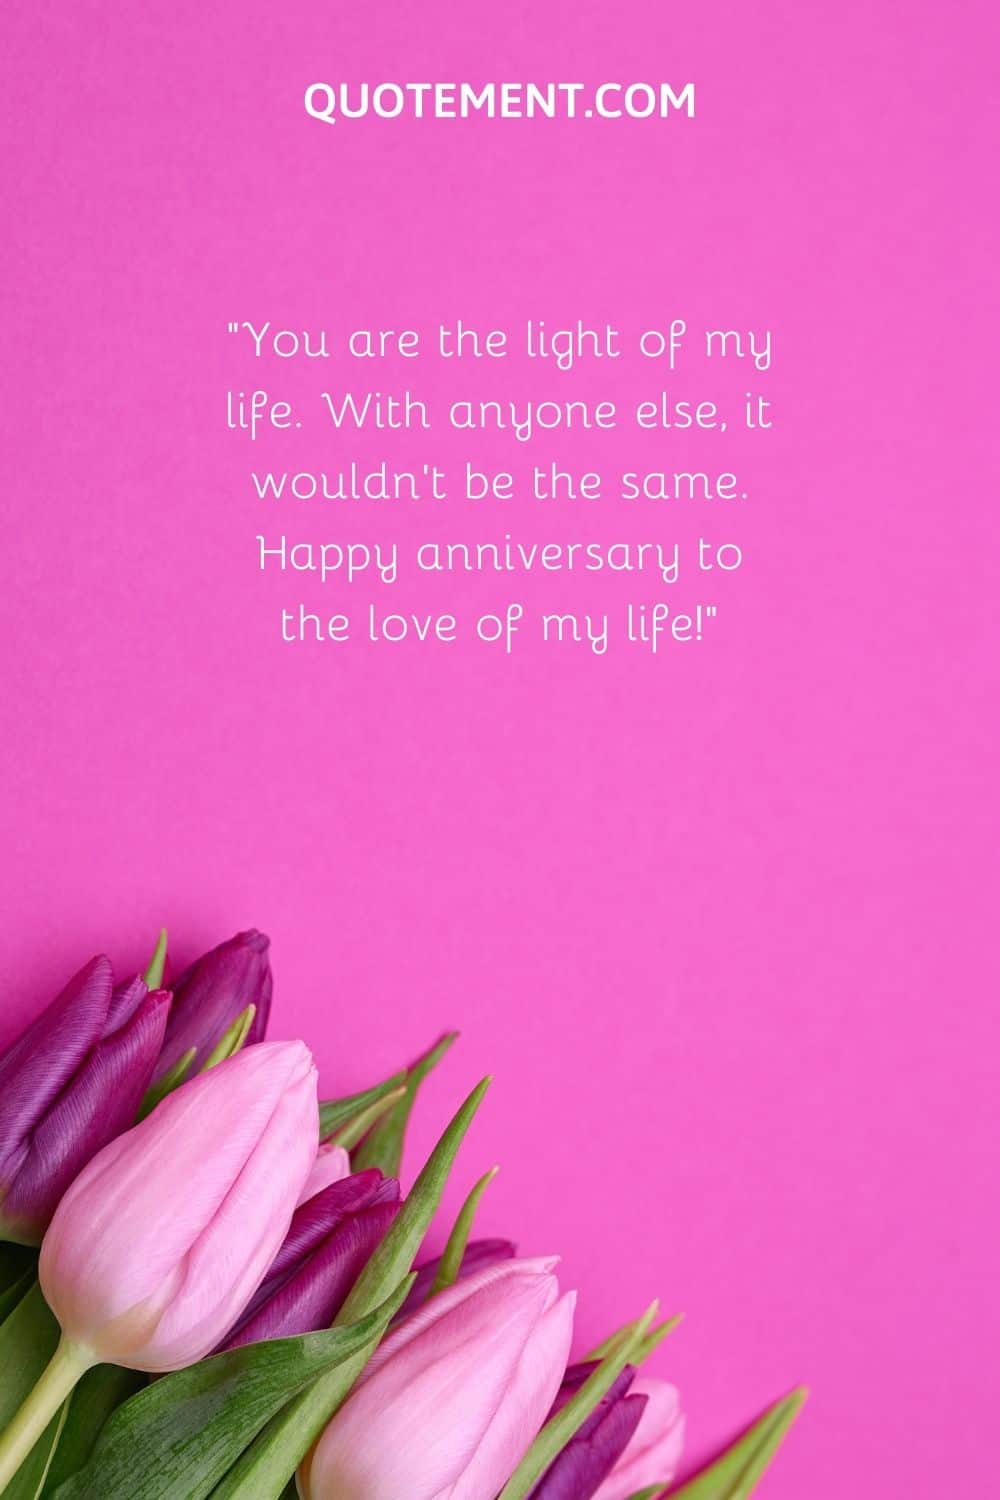 You are the light of my life